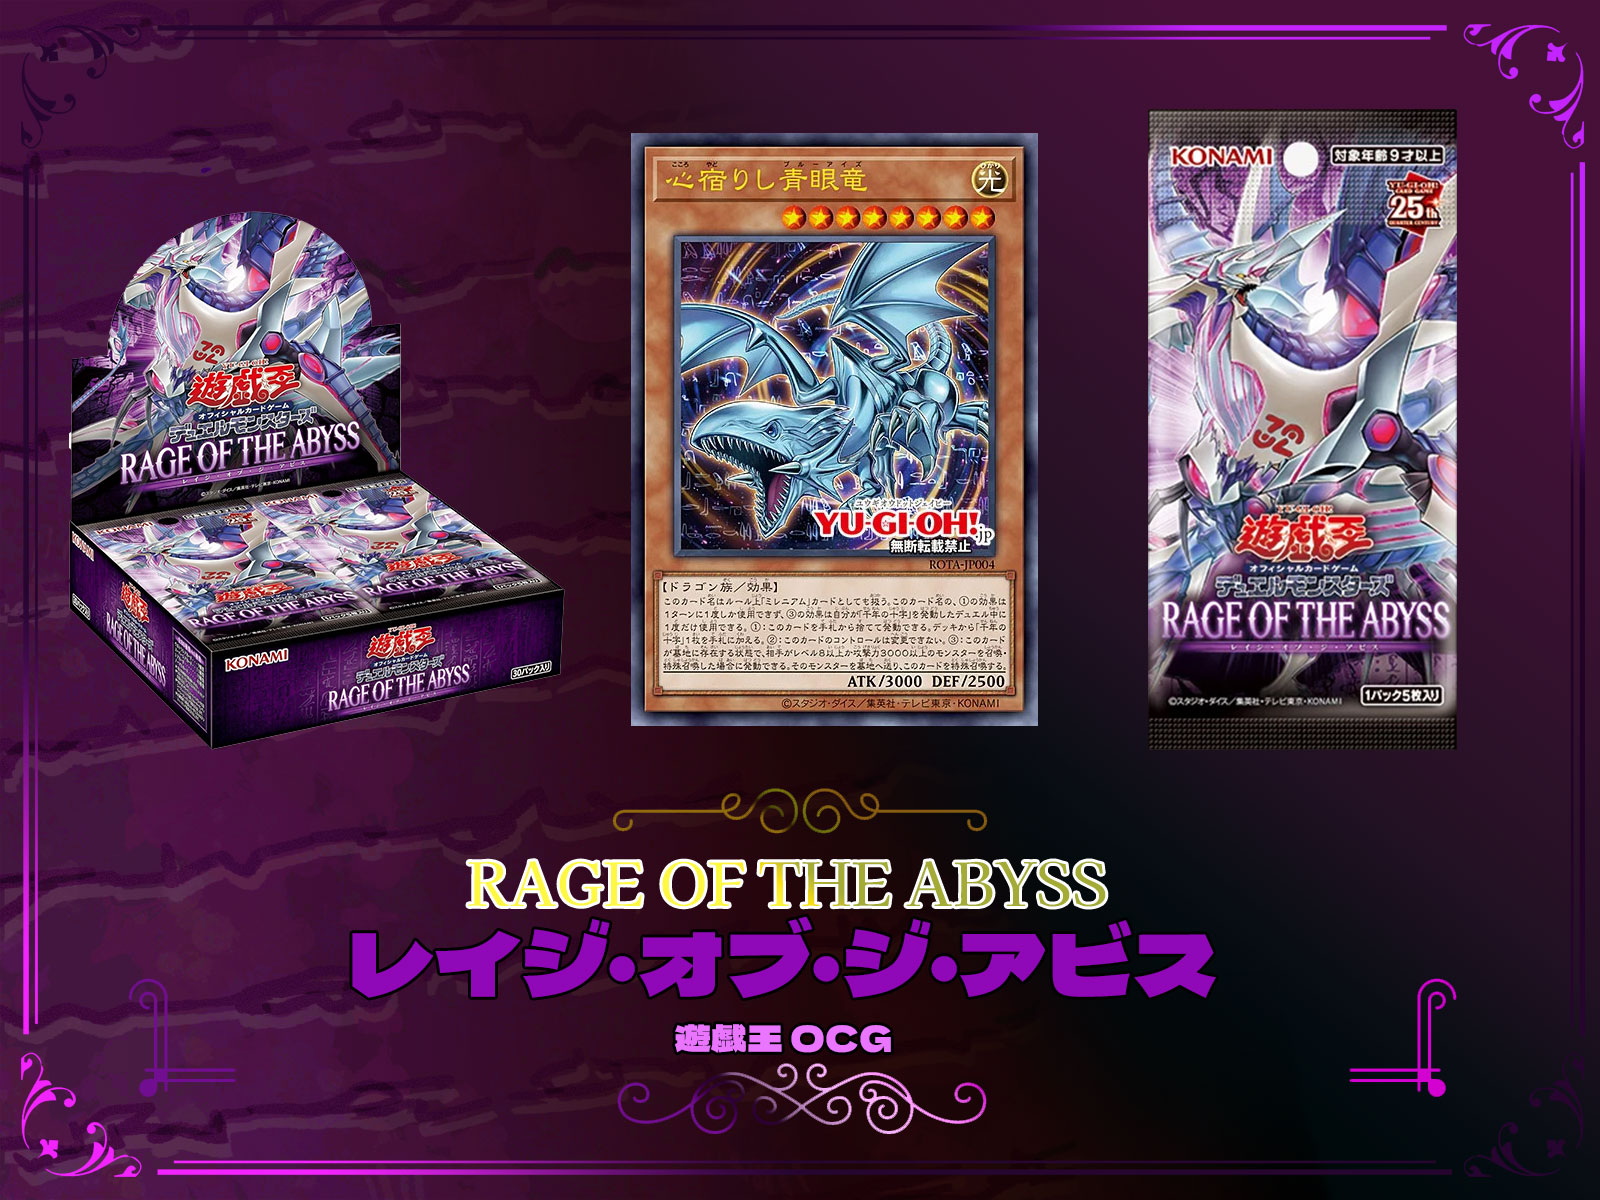 RAGE OF THE ABYSS』25th シークレット（クオシク）買取カードリスト 